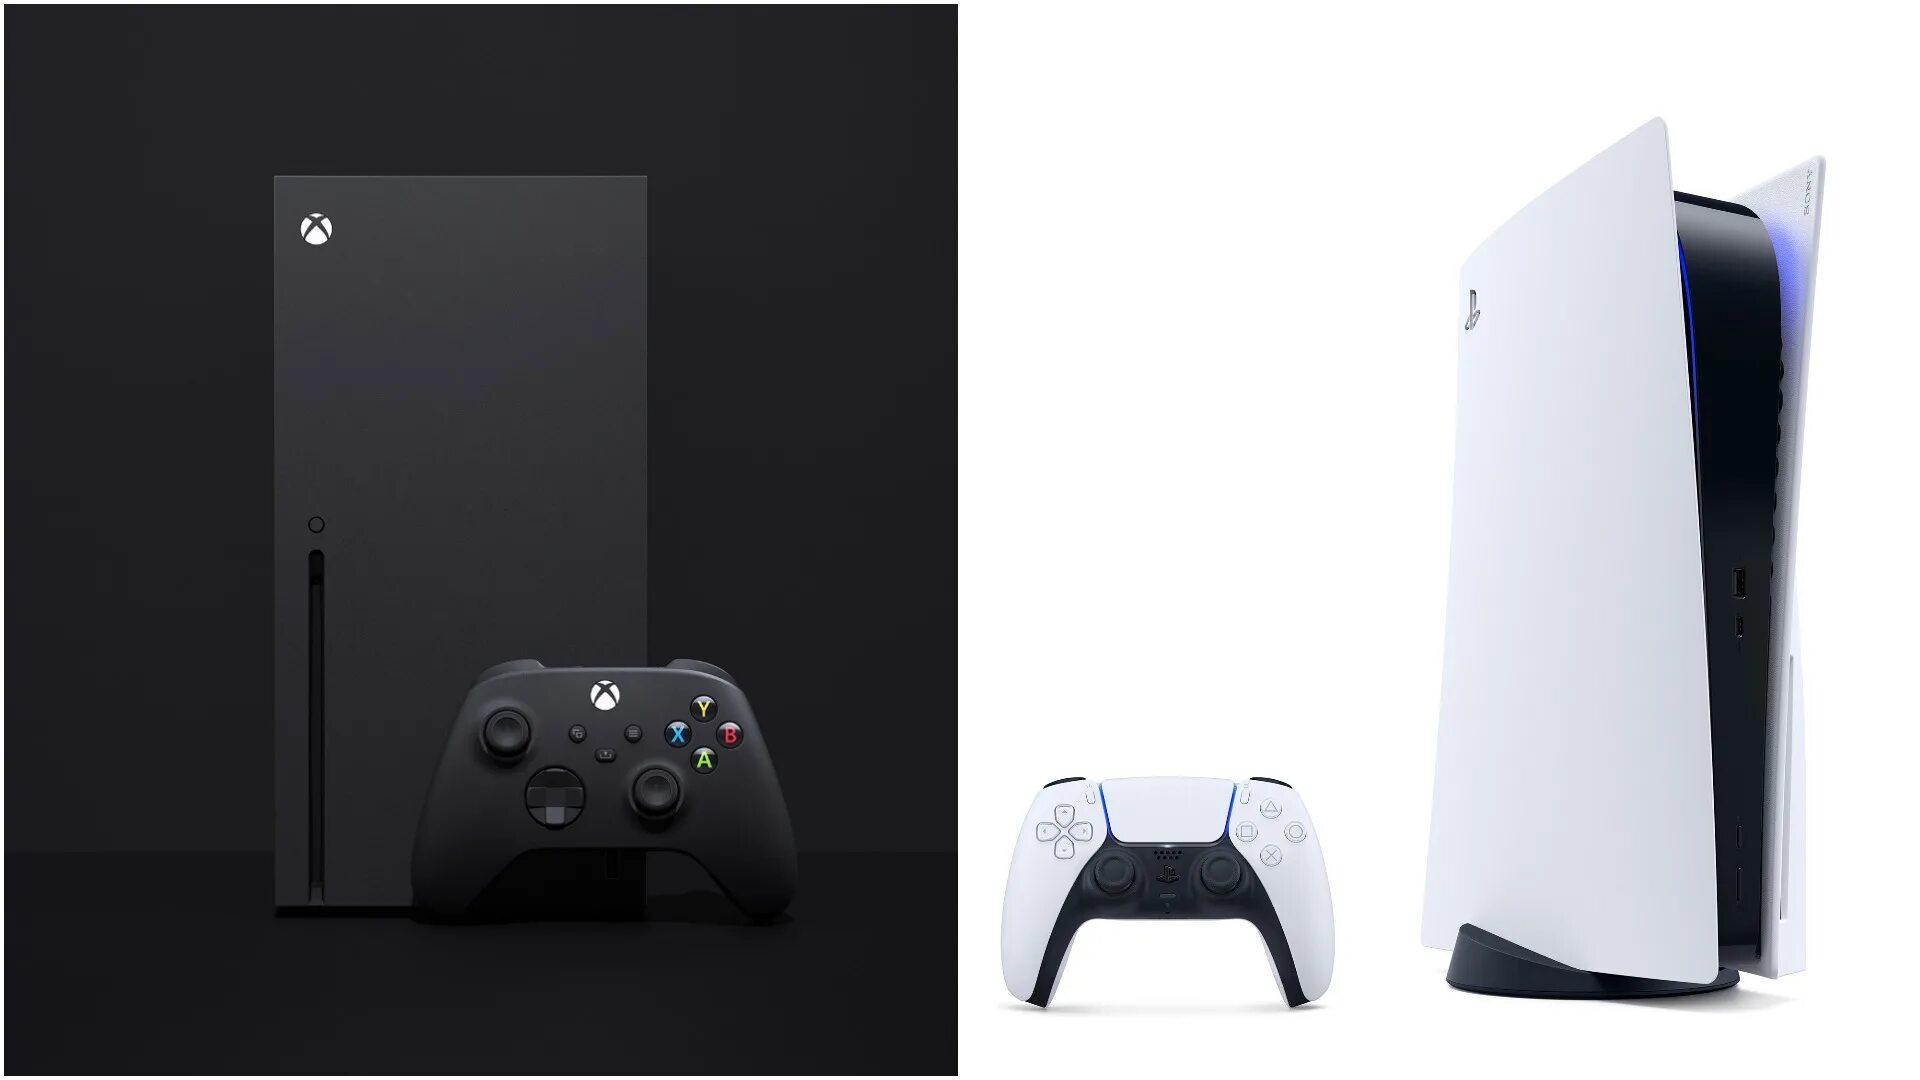 Ps5 vs xbox series. Sony PLAYSTATION ps5 Console. Приставка Sony PLAYSTATION 5. Ps5 Xbox Series x. PLAYSTATION 5 Xbox Series x.